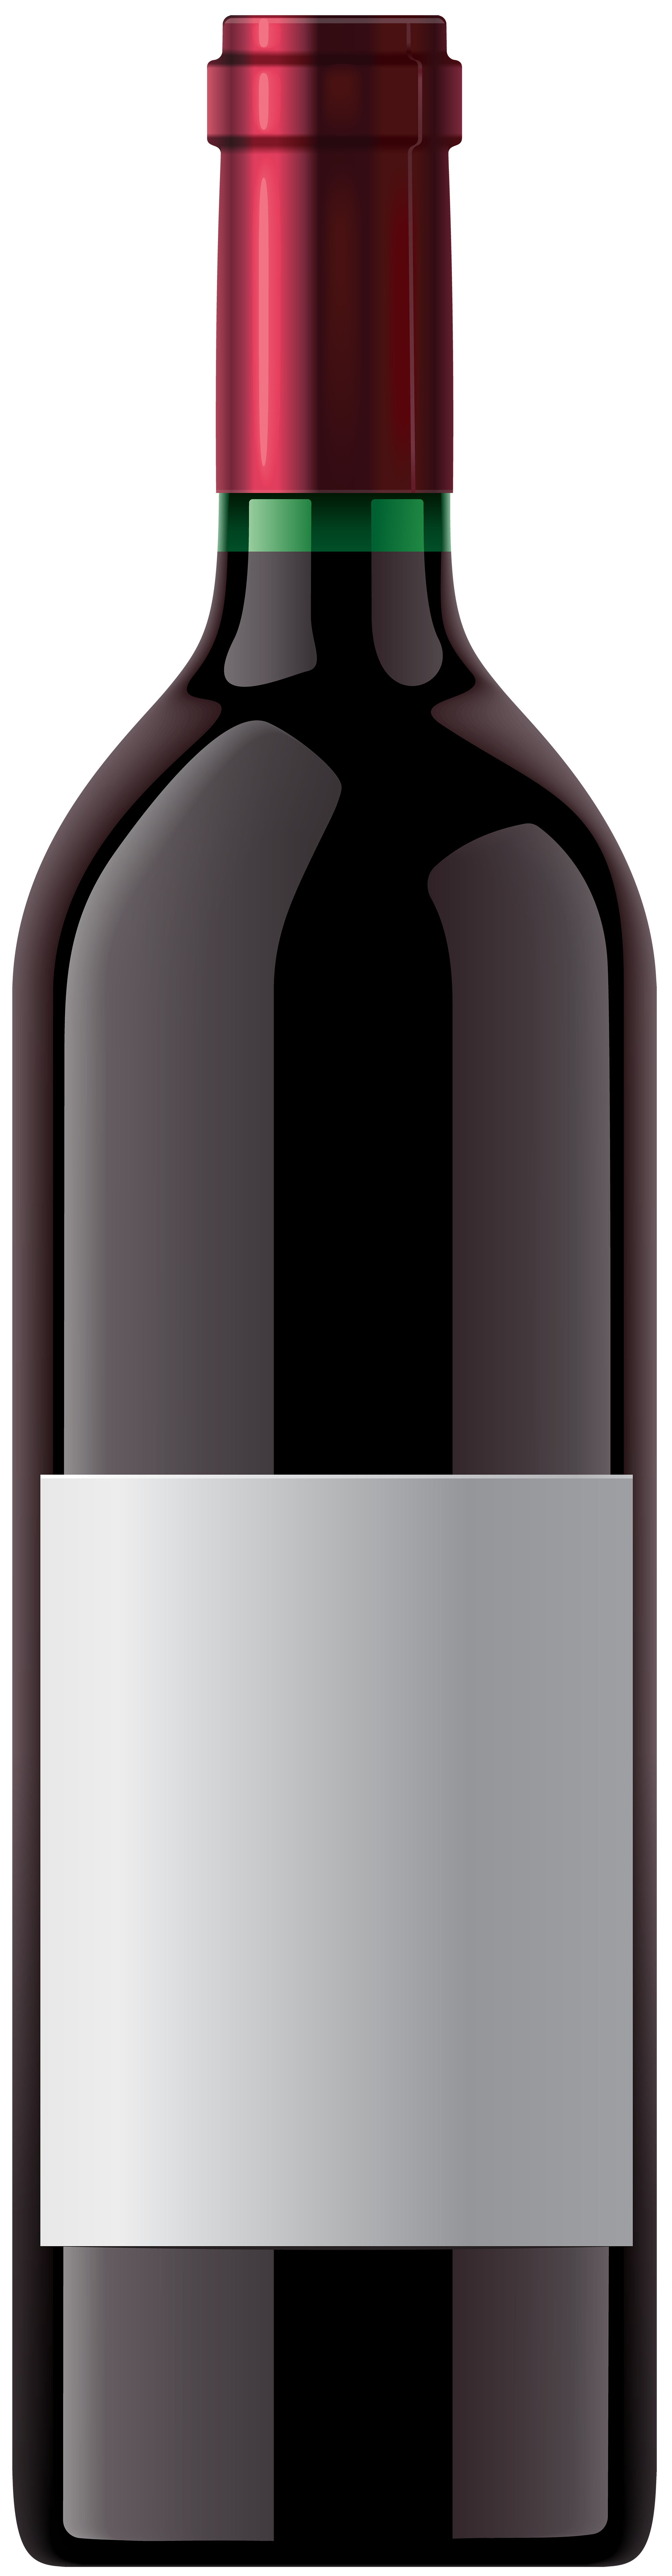 red wine bottle png clip art image gallery yopriceville high quality images and transparent png free clipart gallery yopriceville